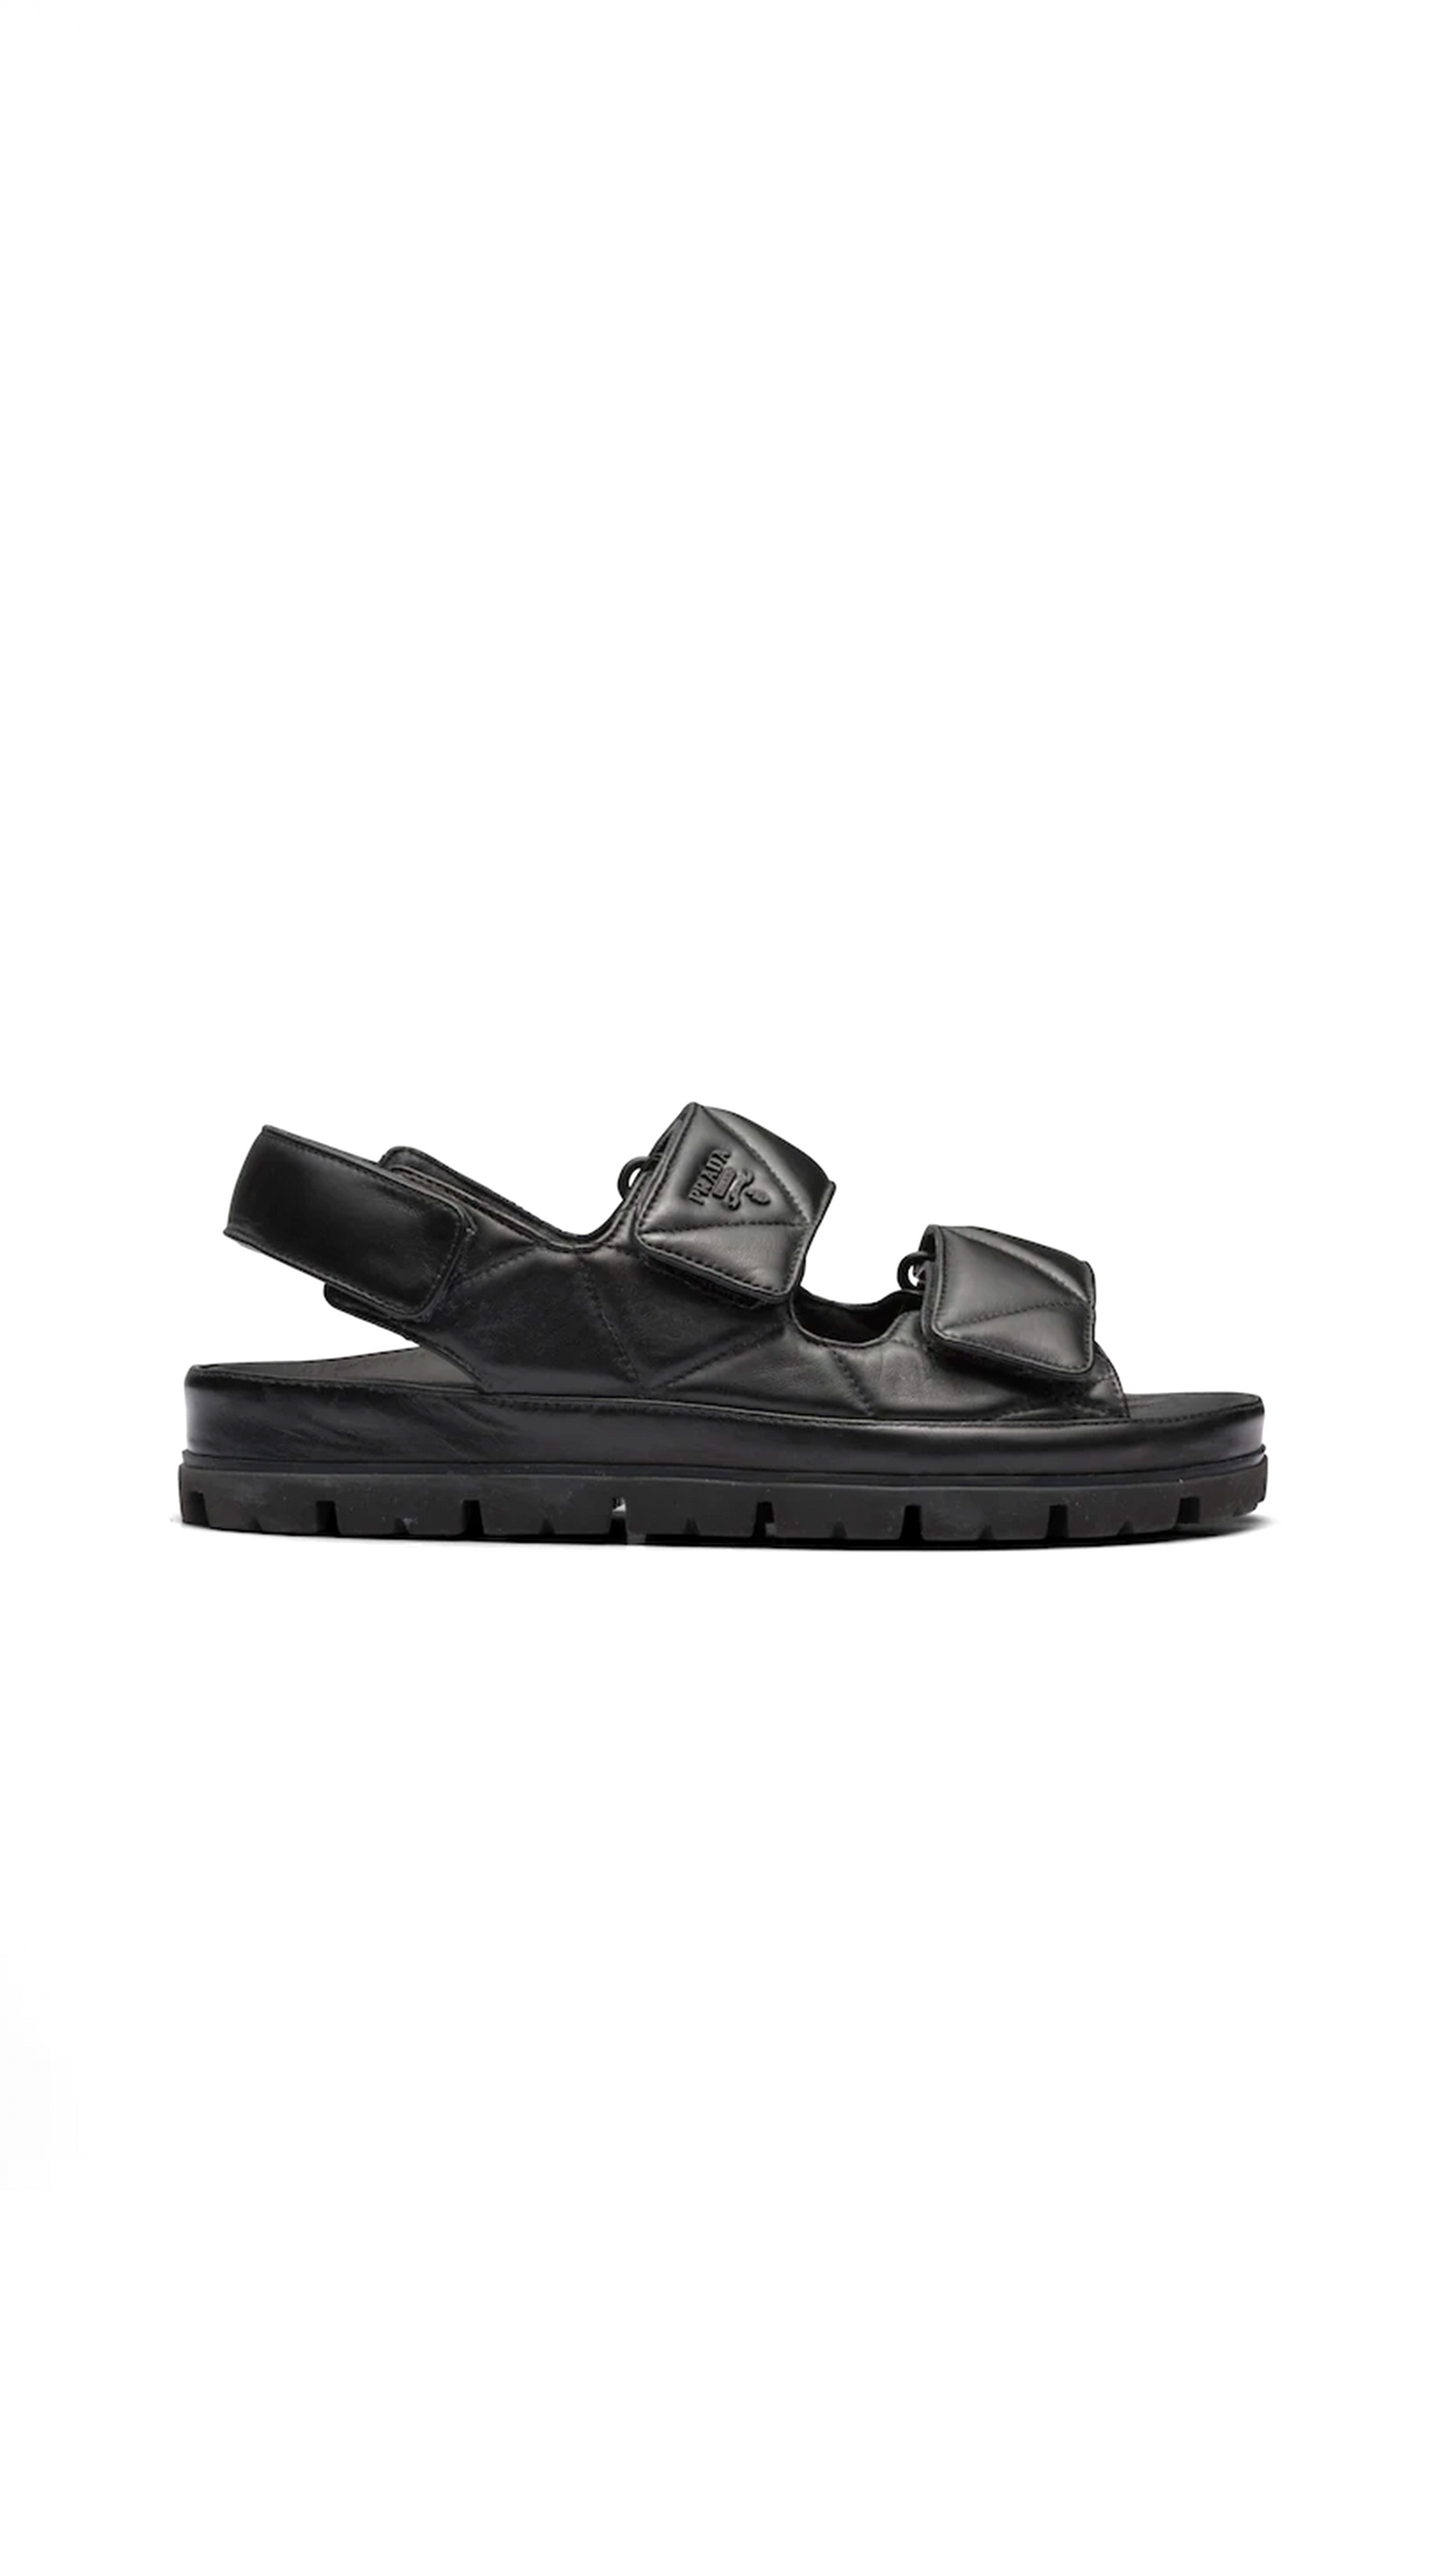 Padded Nappa Leather Sandals - Black